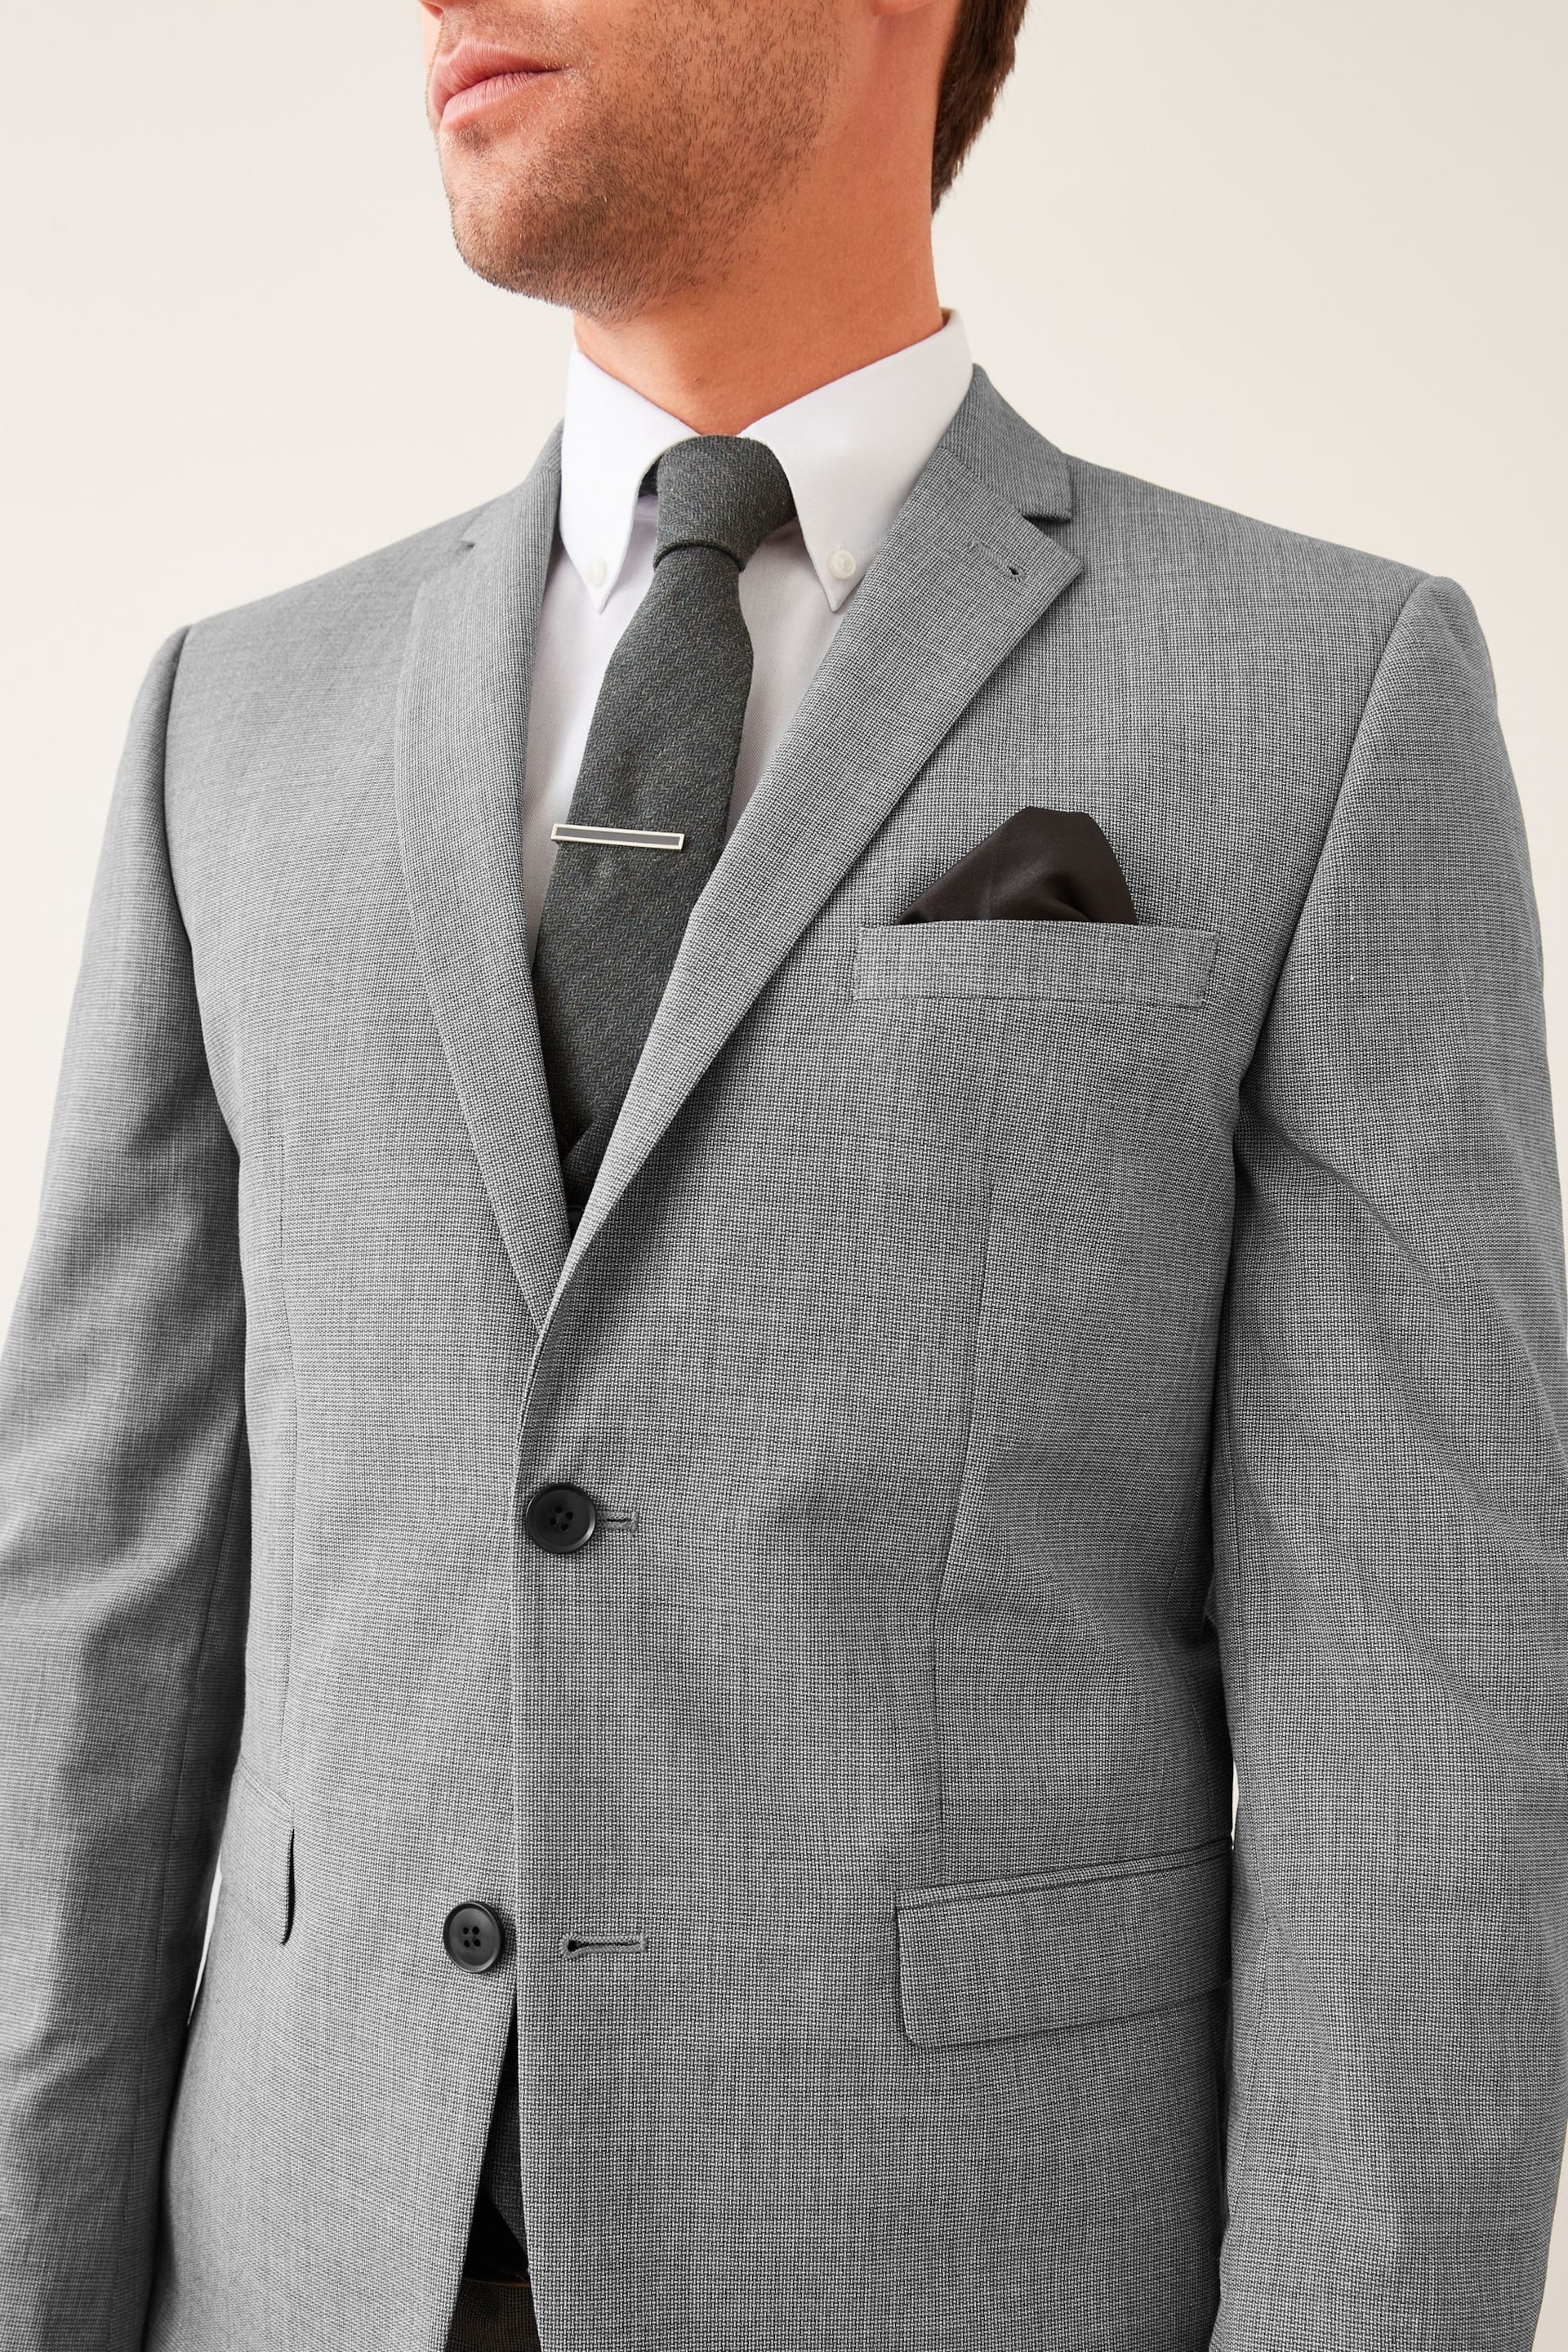 Light Grey Tailored Wool Mix Textured Suit Jacket - Image 5 of 9